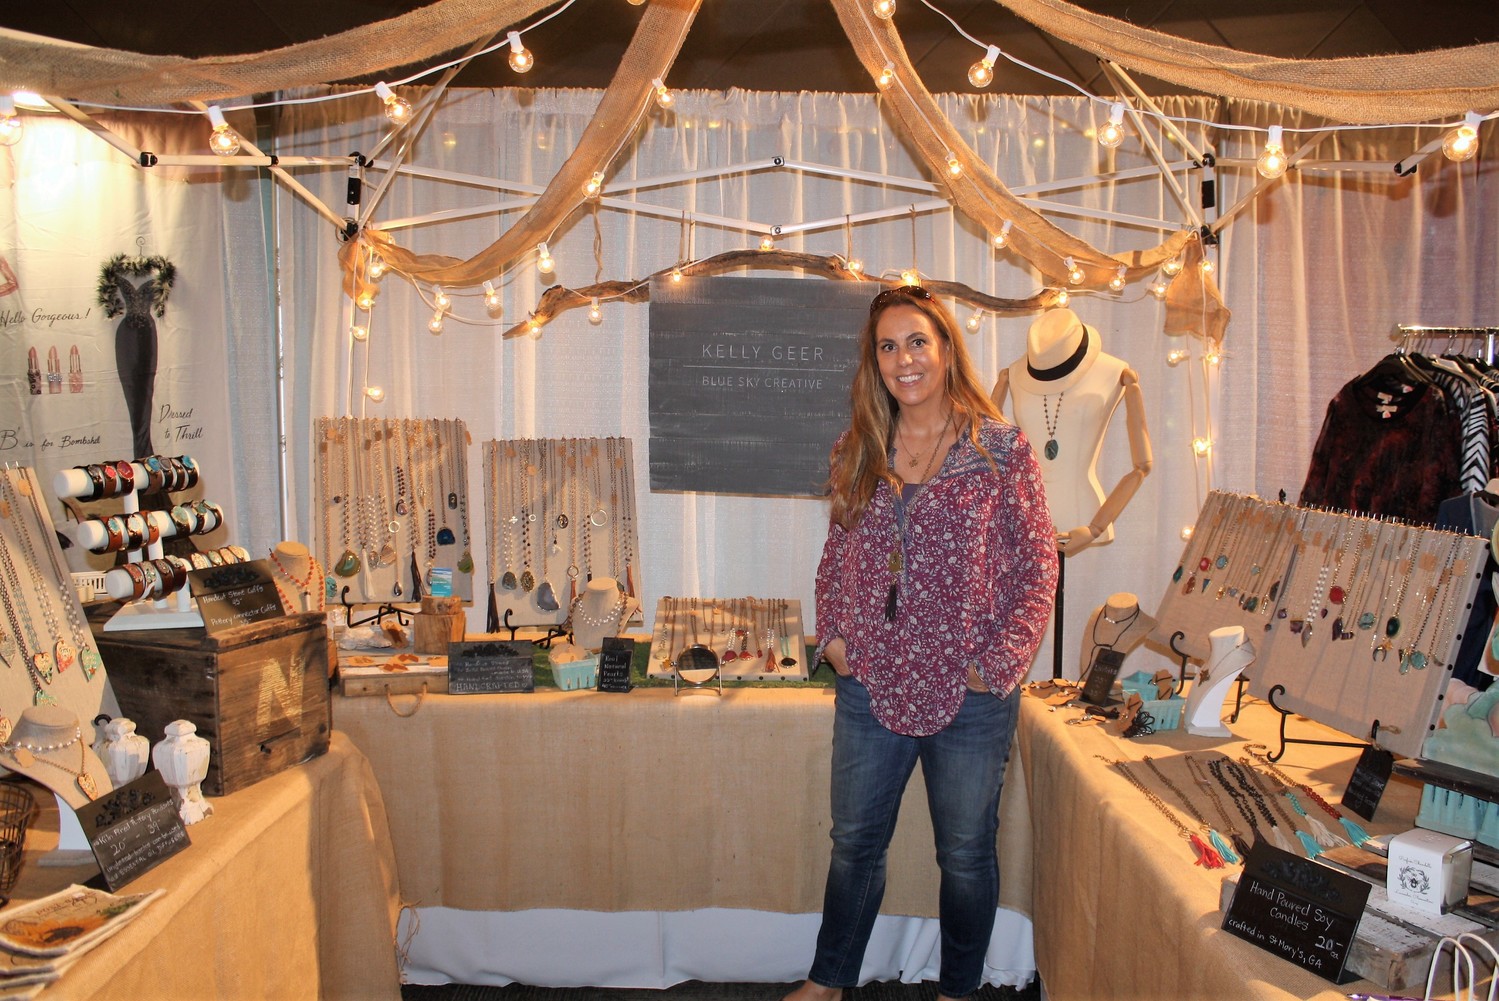 Kelly Geer of Blue Sky Creative stands with her handcrafted jewelry.